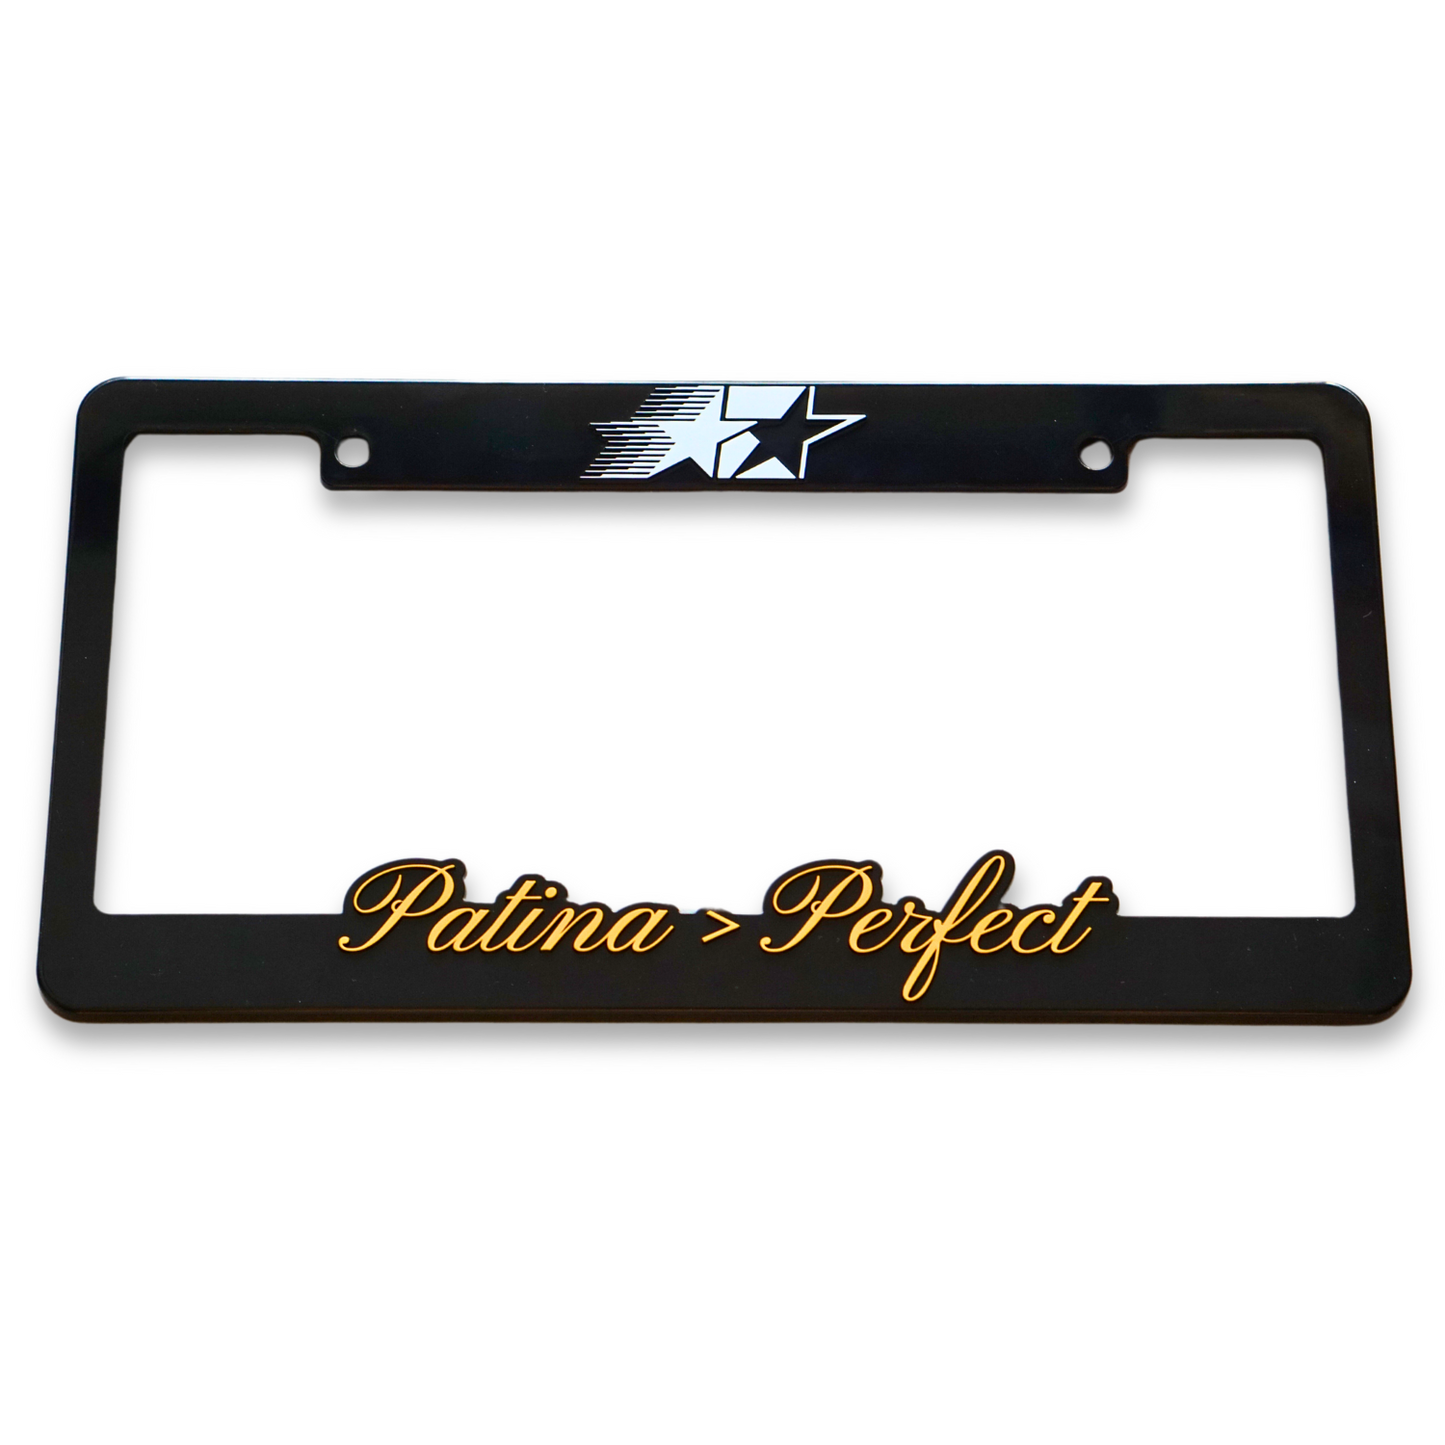 Patina > Perfect Plate Frame